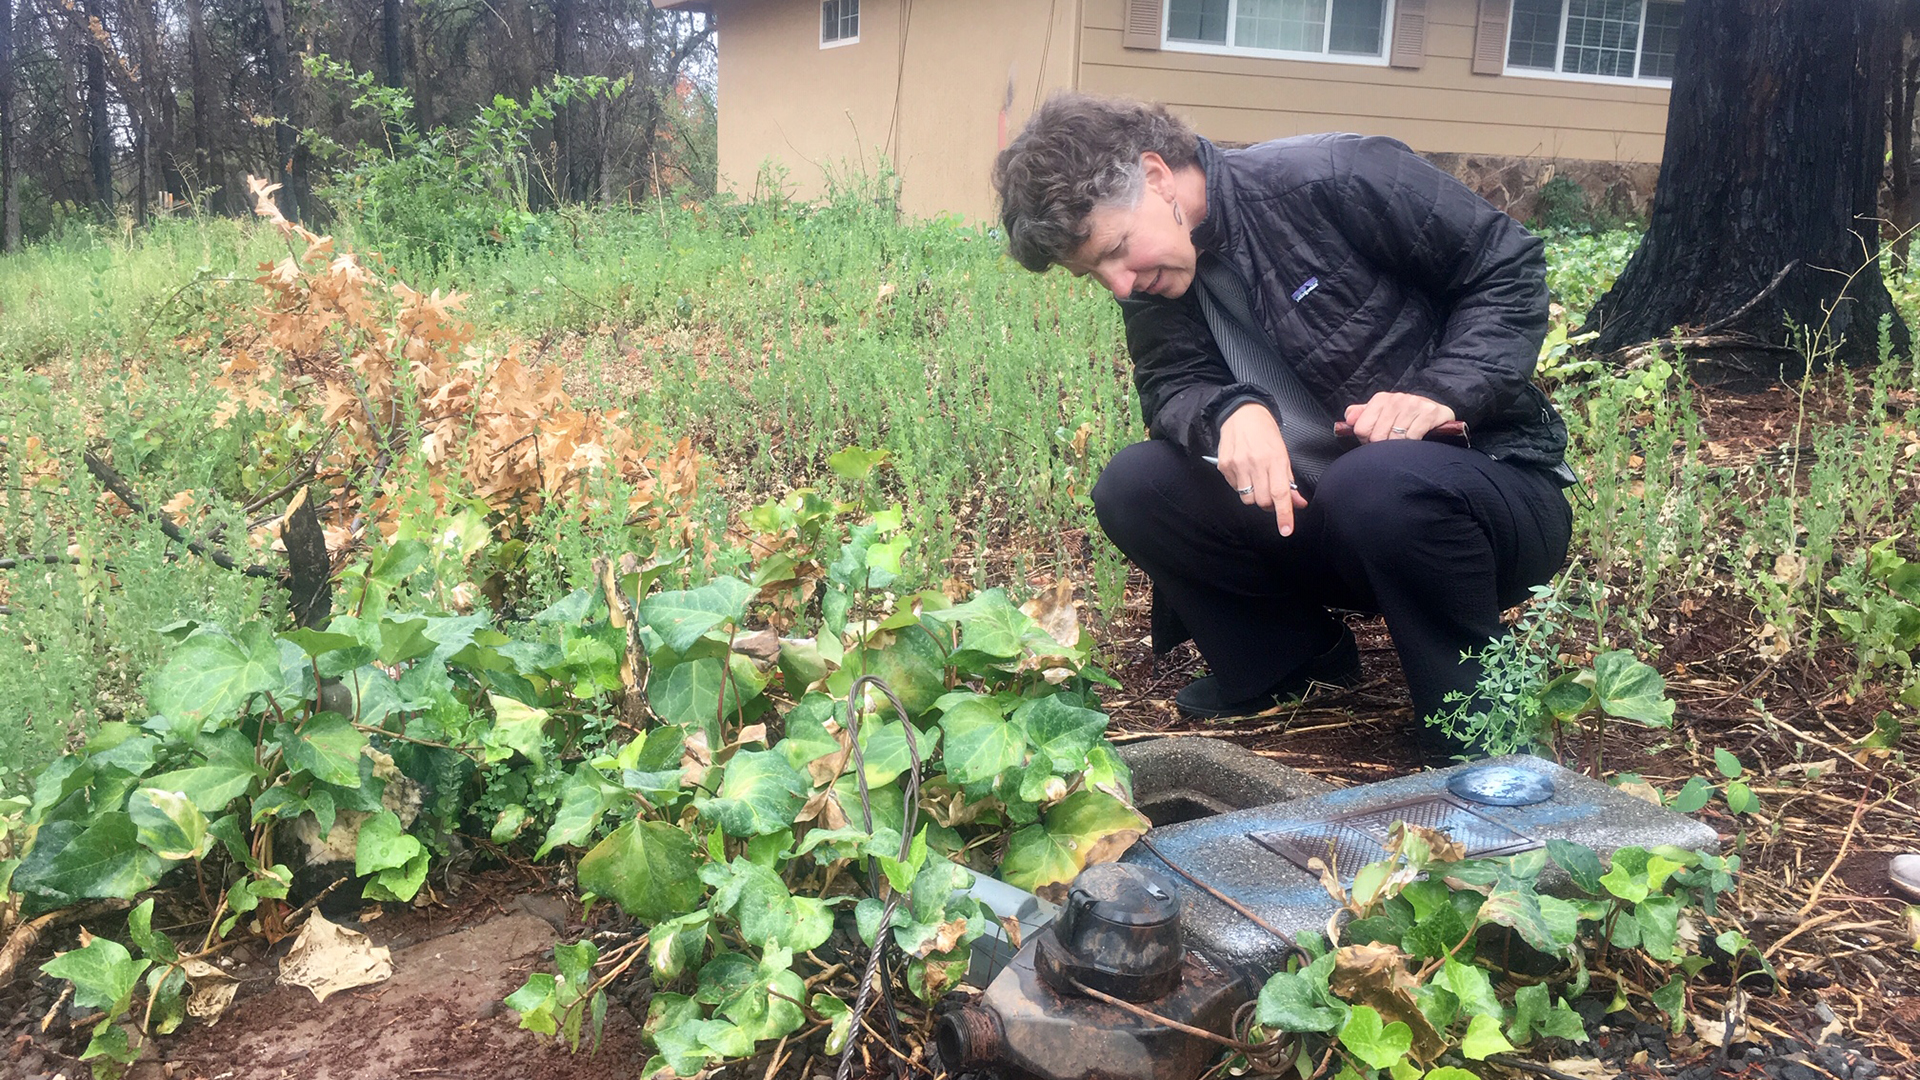 Public health investigator Dr. Gina Solomon examines a water meter in Paradise. Her team will do the first testing for the carcinogen benzene inside homes left standing by the Camp Fire.